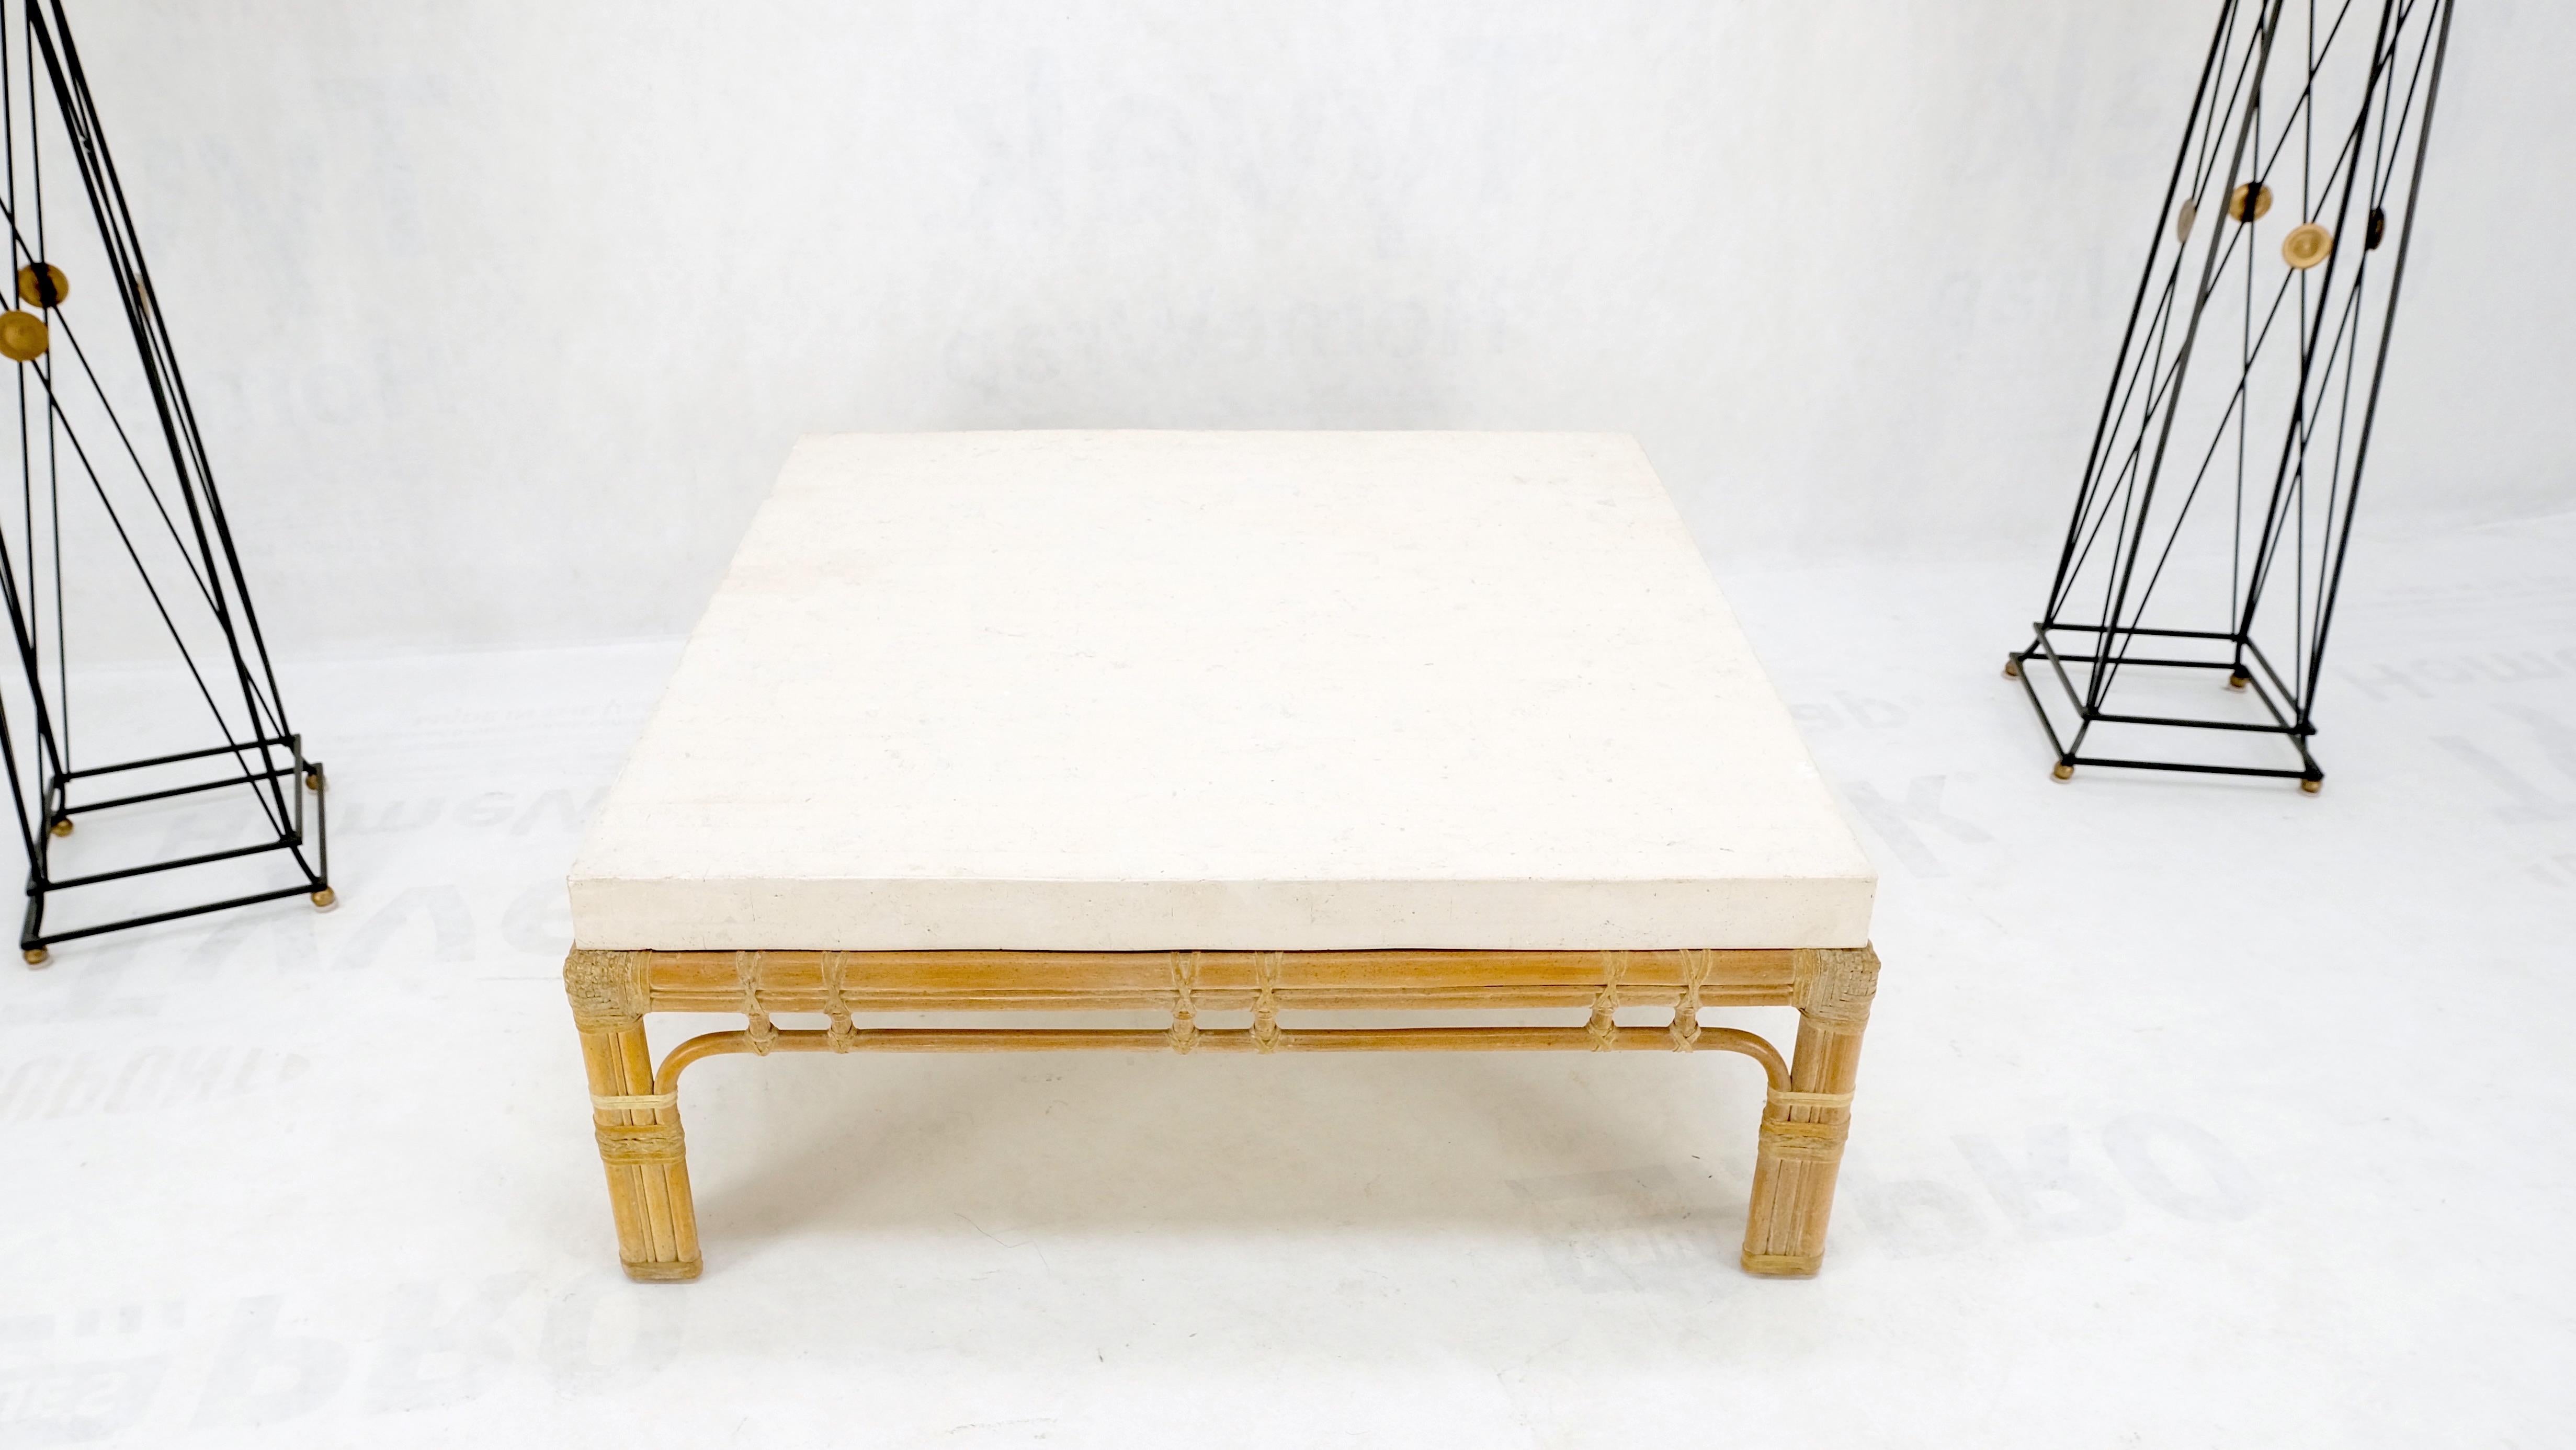 Bamboo Base Square White Lime Stone Top Mid-Century Modern Coffee Table Mint In Good Condition For Sale In Rockaway, NJ